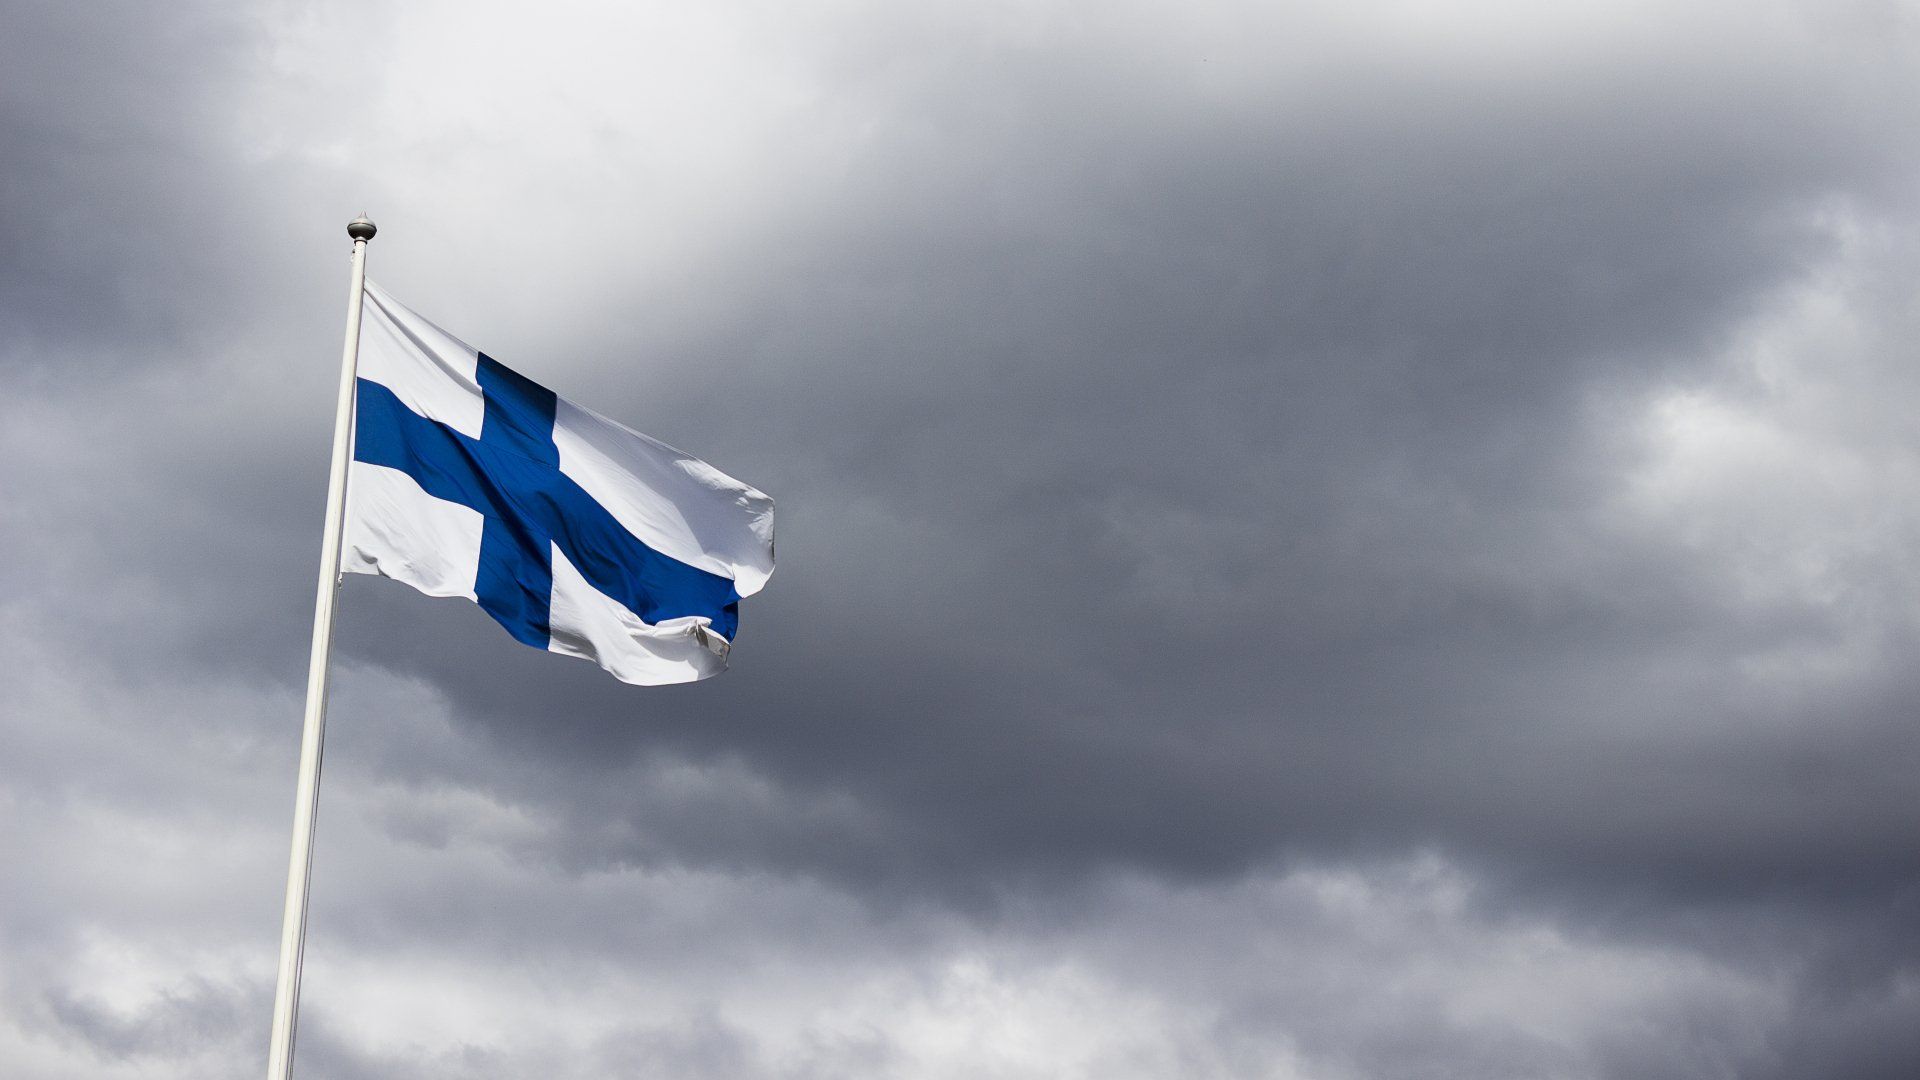 The Finnish flag waving proudly against a dramatic backdrop of storm clouds, symbolizing the resilience and strength of Finland. 